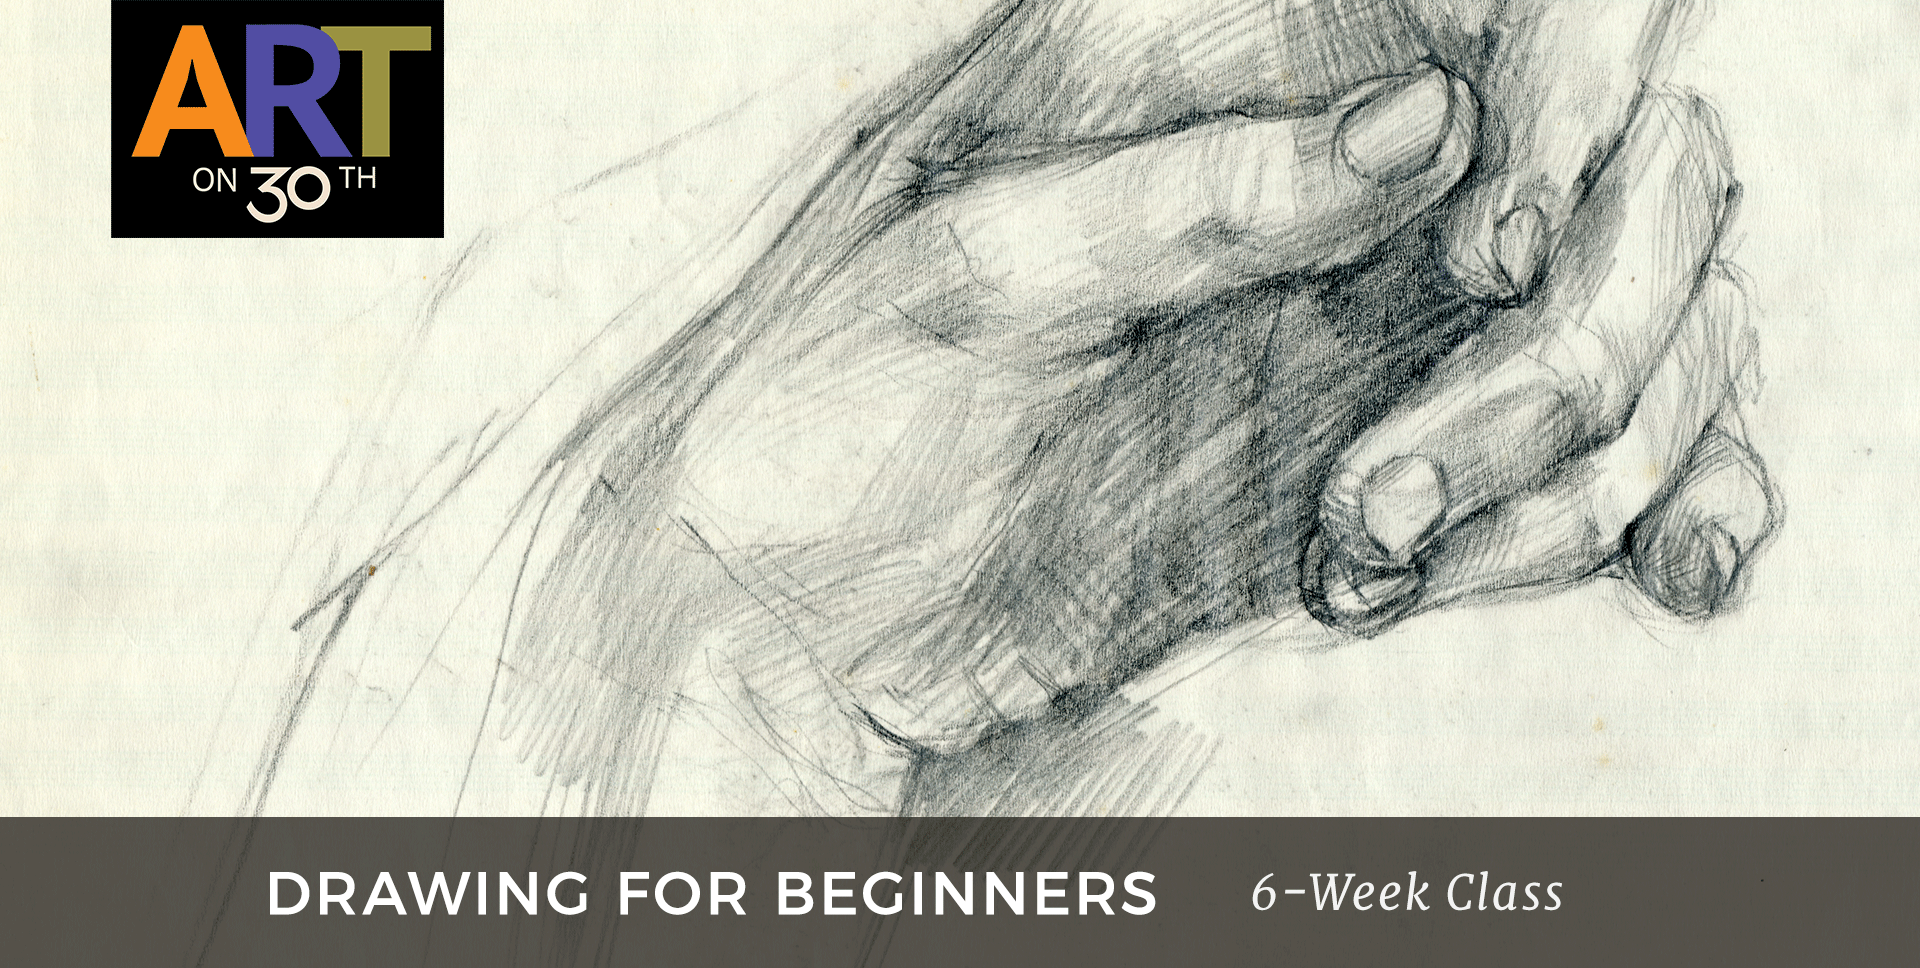 TUE - Drawing for Beginners with Mick Phelan